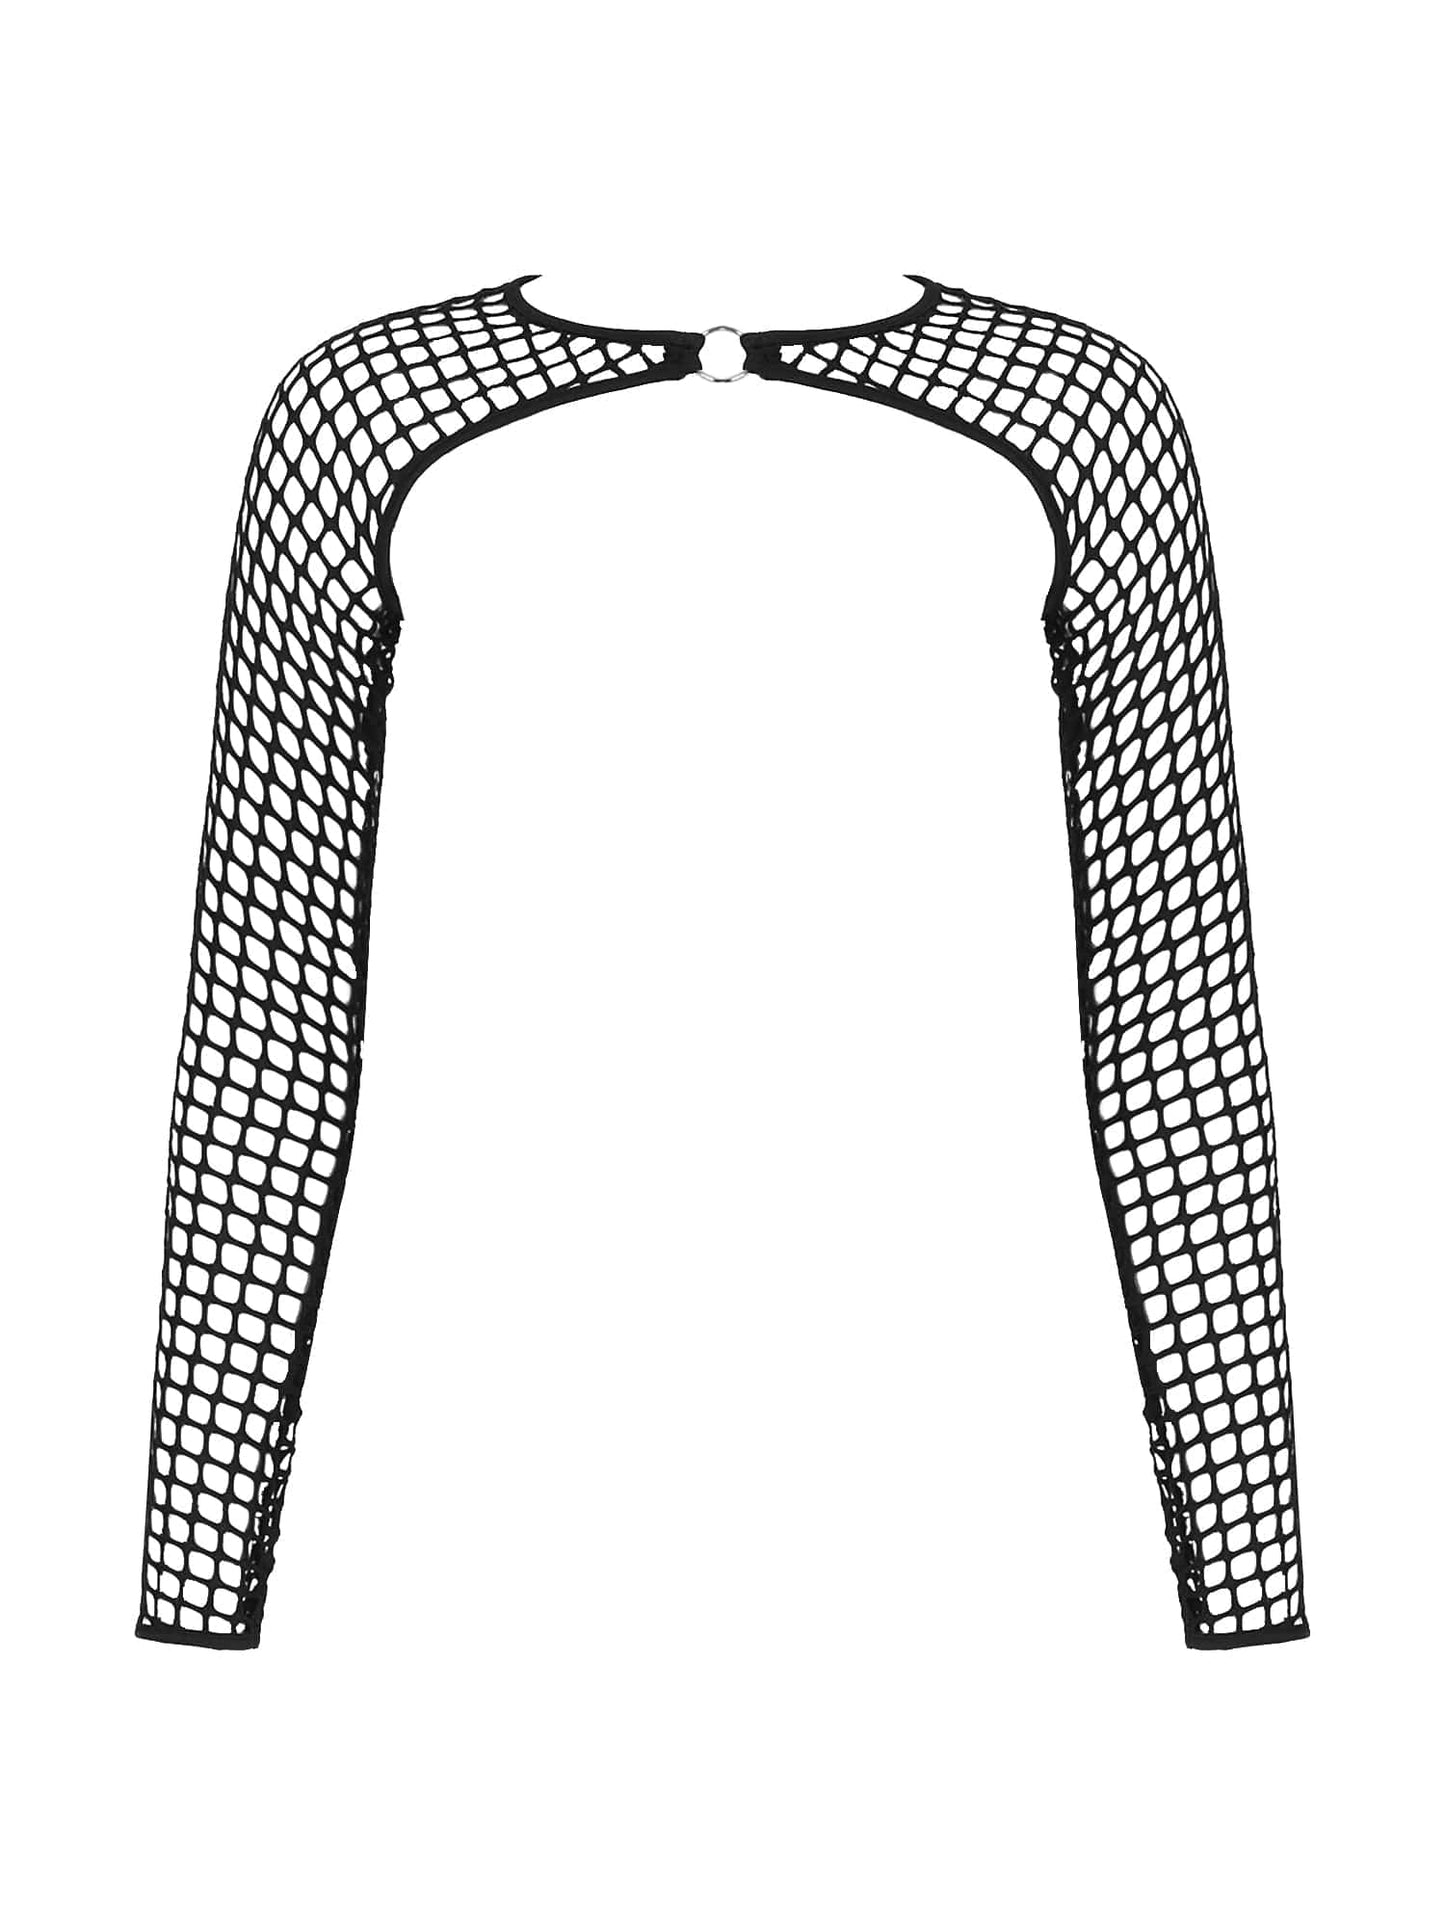 Kinky Cloth Fishnet O Ring Cover Ups Top